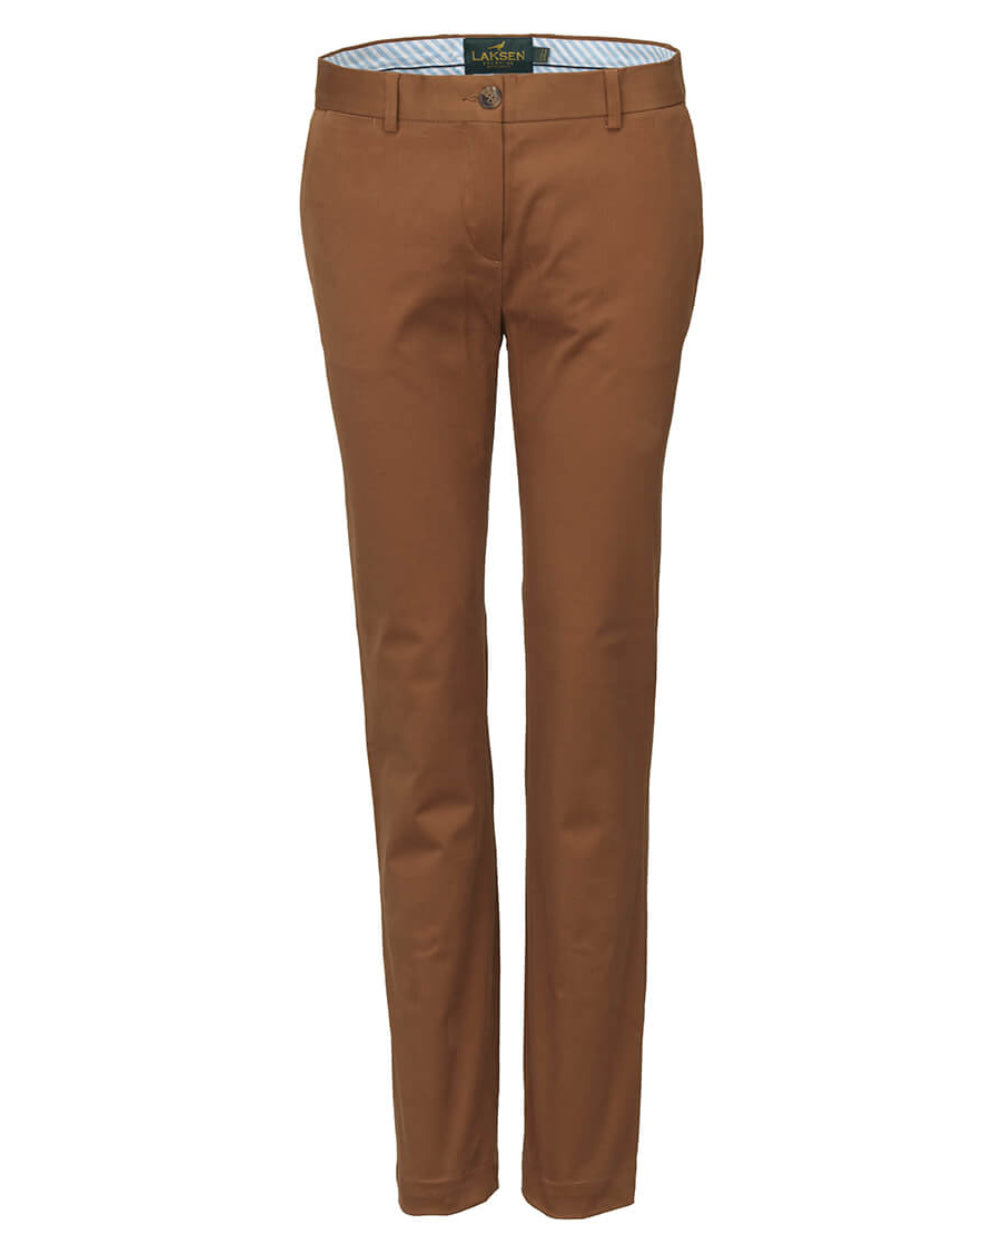 Camel Coloured Laksen Pennyton Chino Trousers On A White Background 